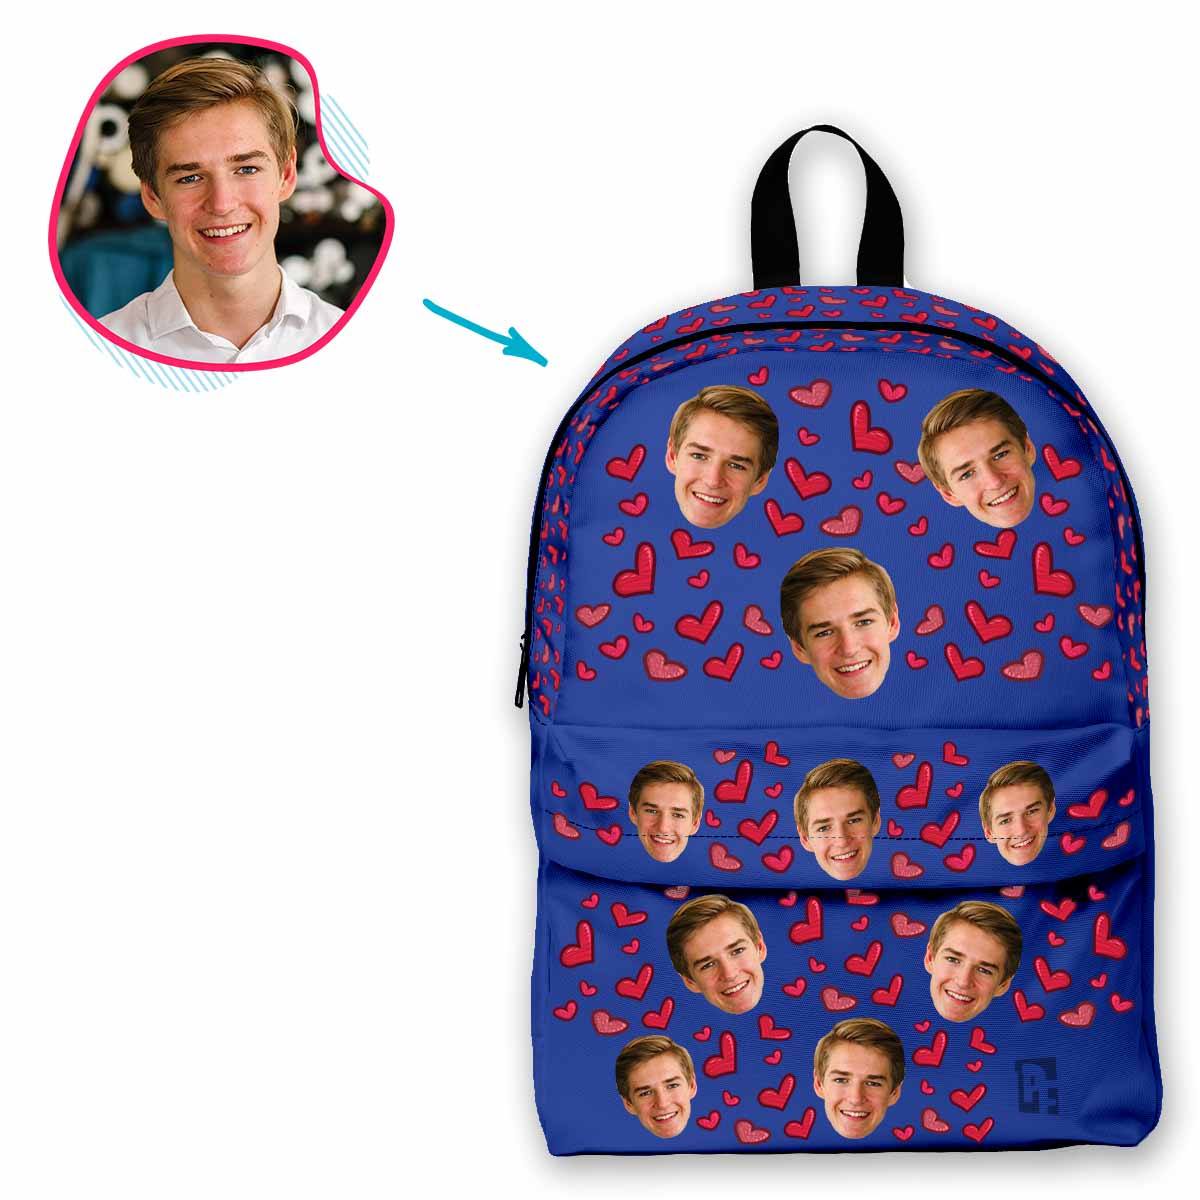 darkblue Heart classic backpack personalized with photo of face printed on it